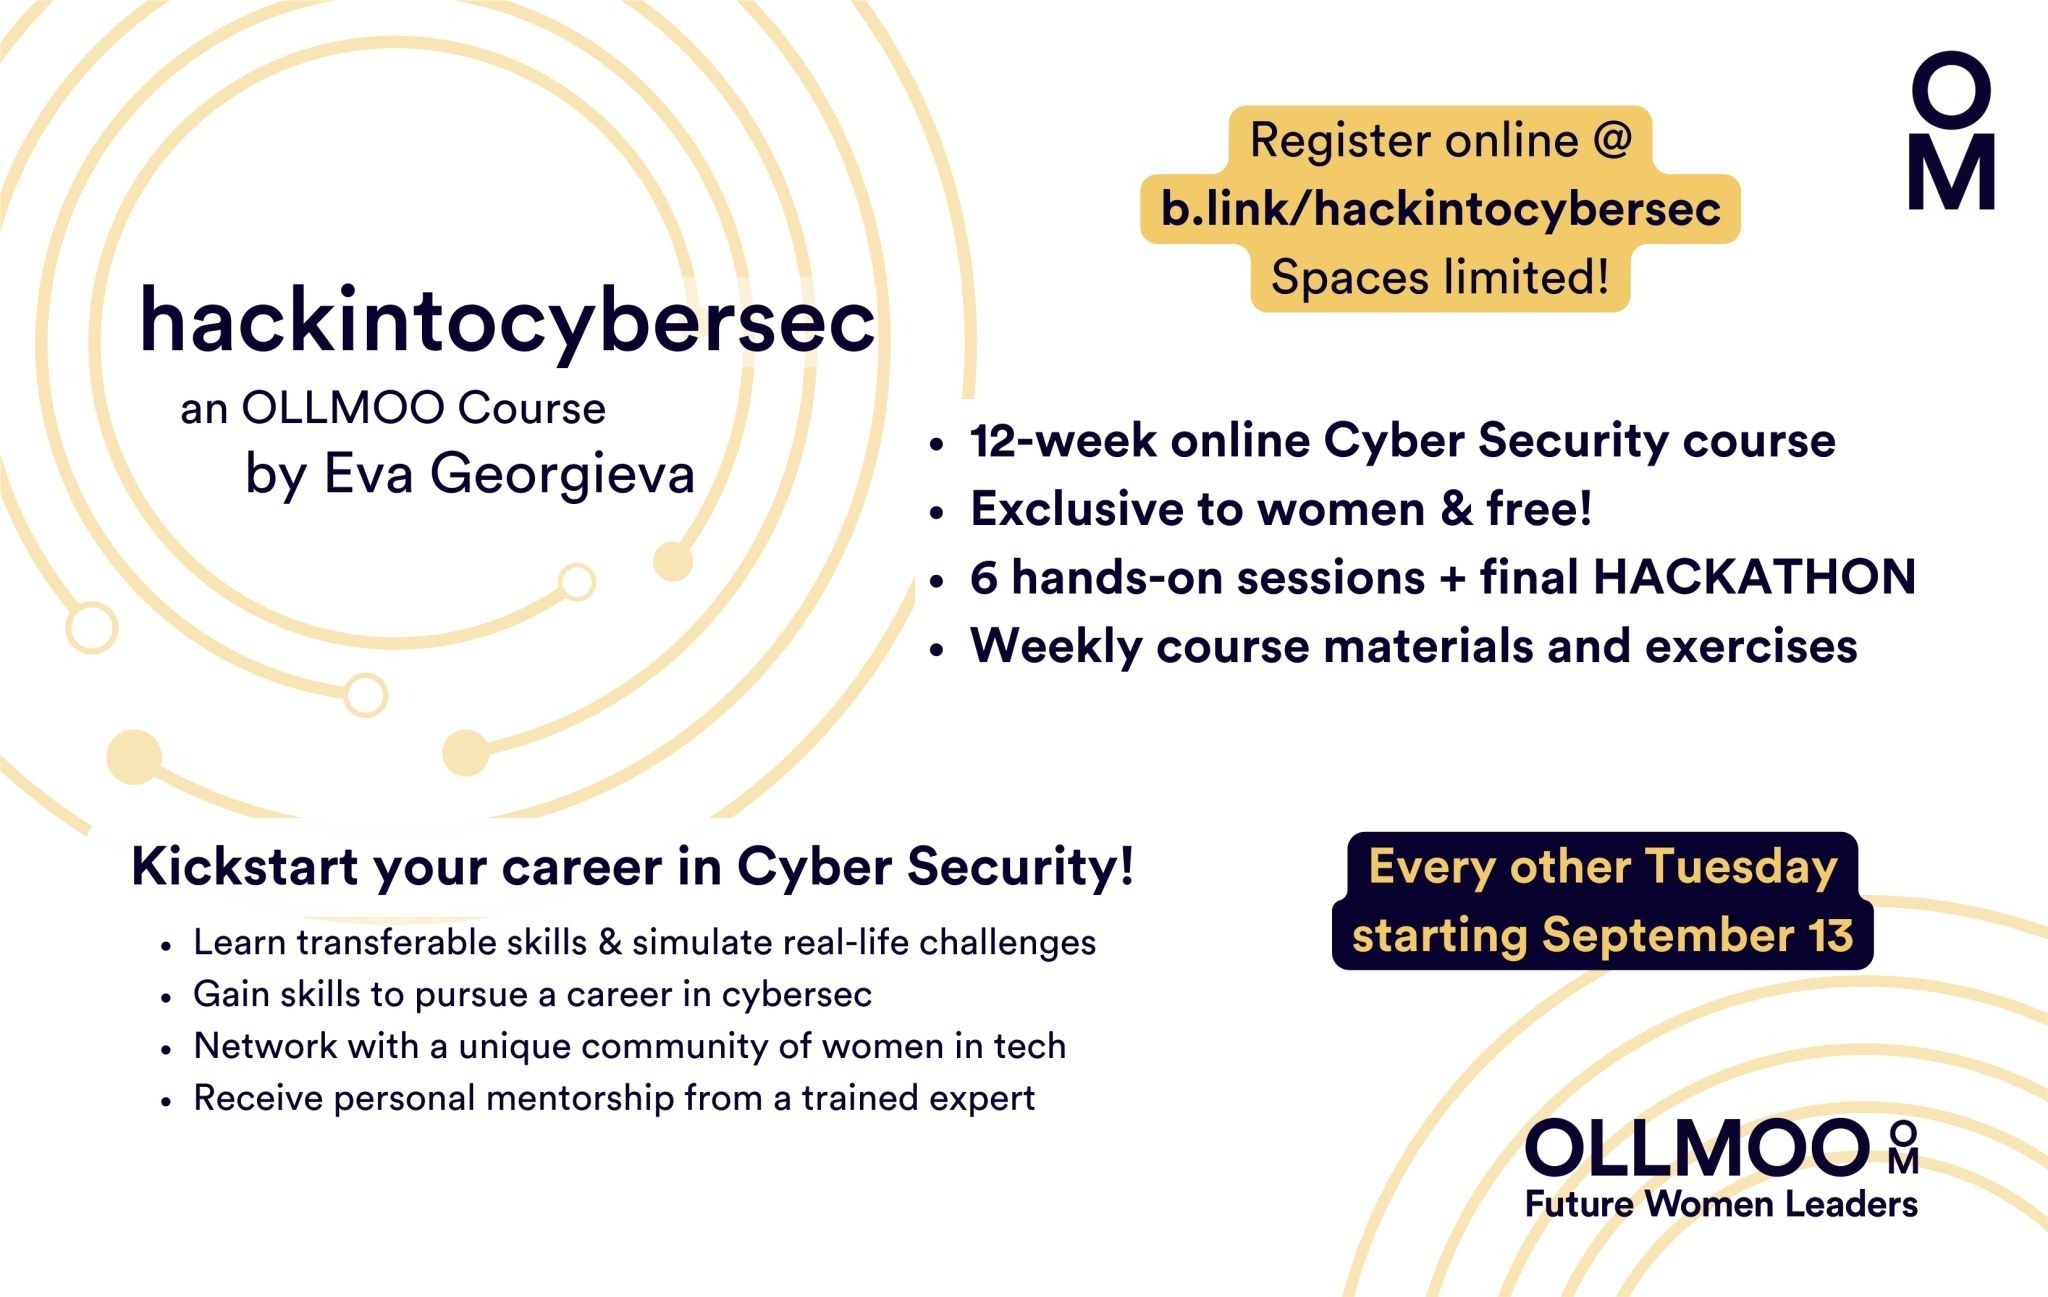 An image titled “hackintocybersec” with a description of a 12-week Cyber Security course for women, aimed at teaching them skills to enter a career in cybersecurity